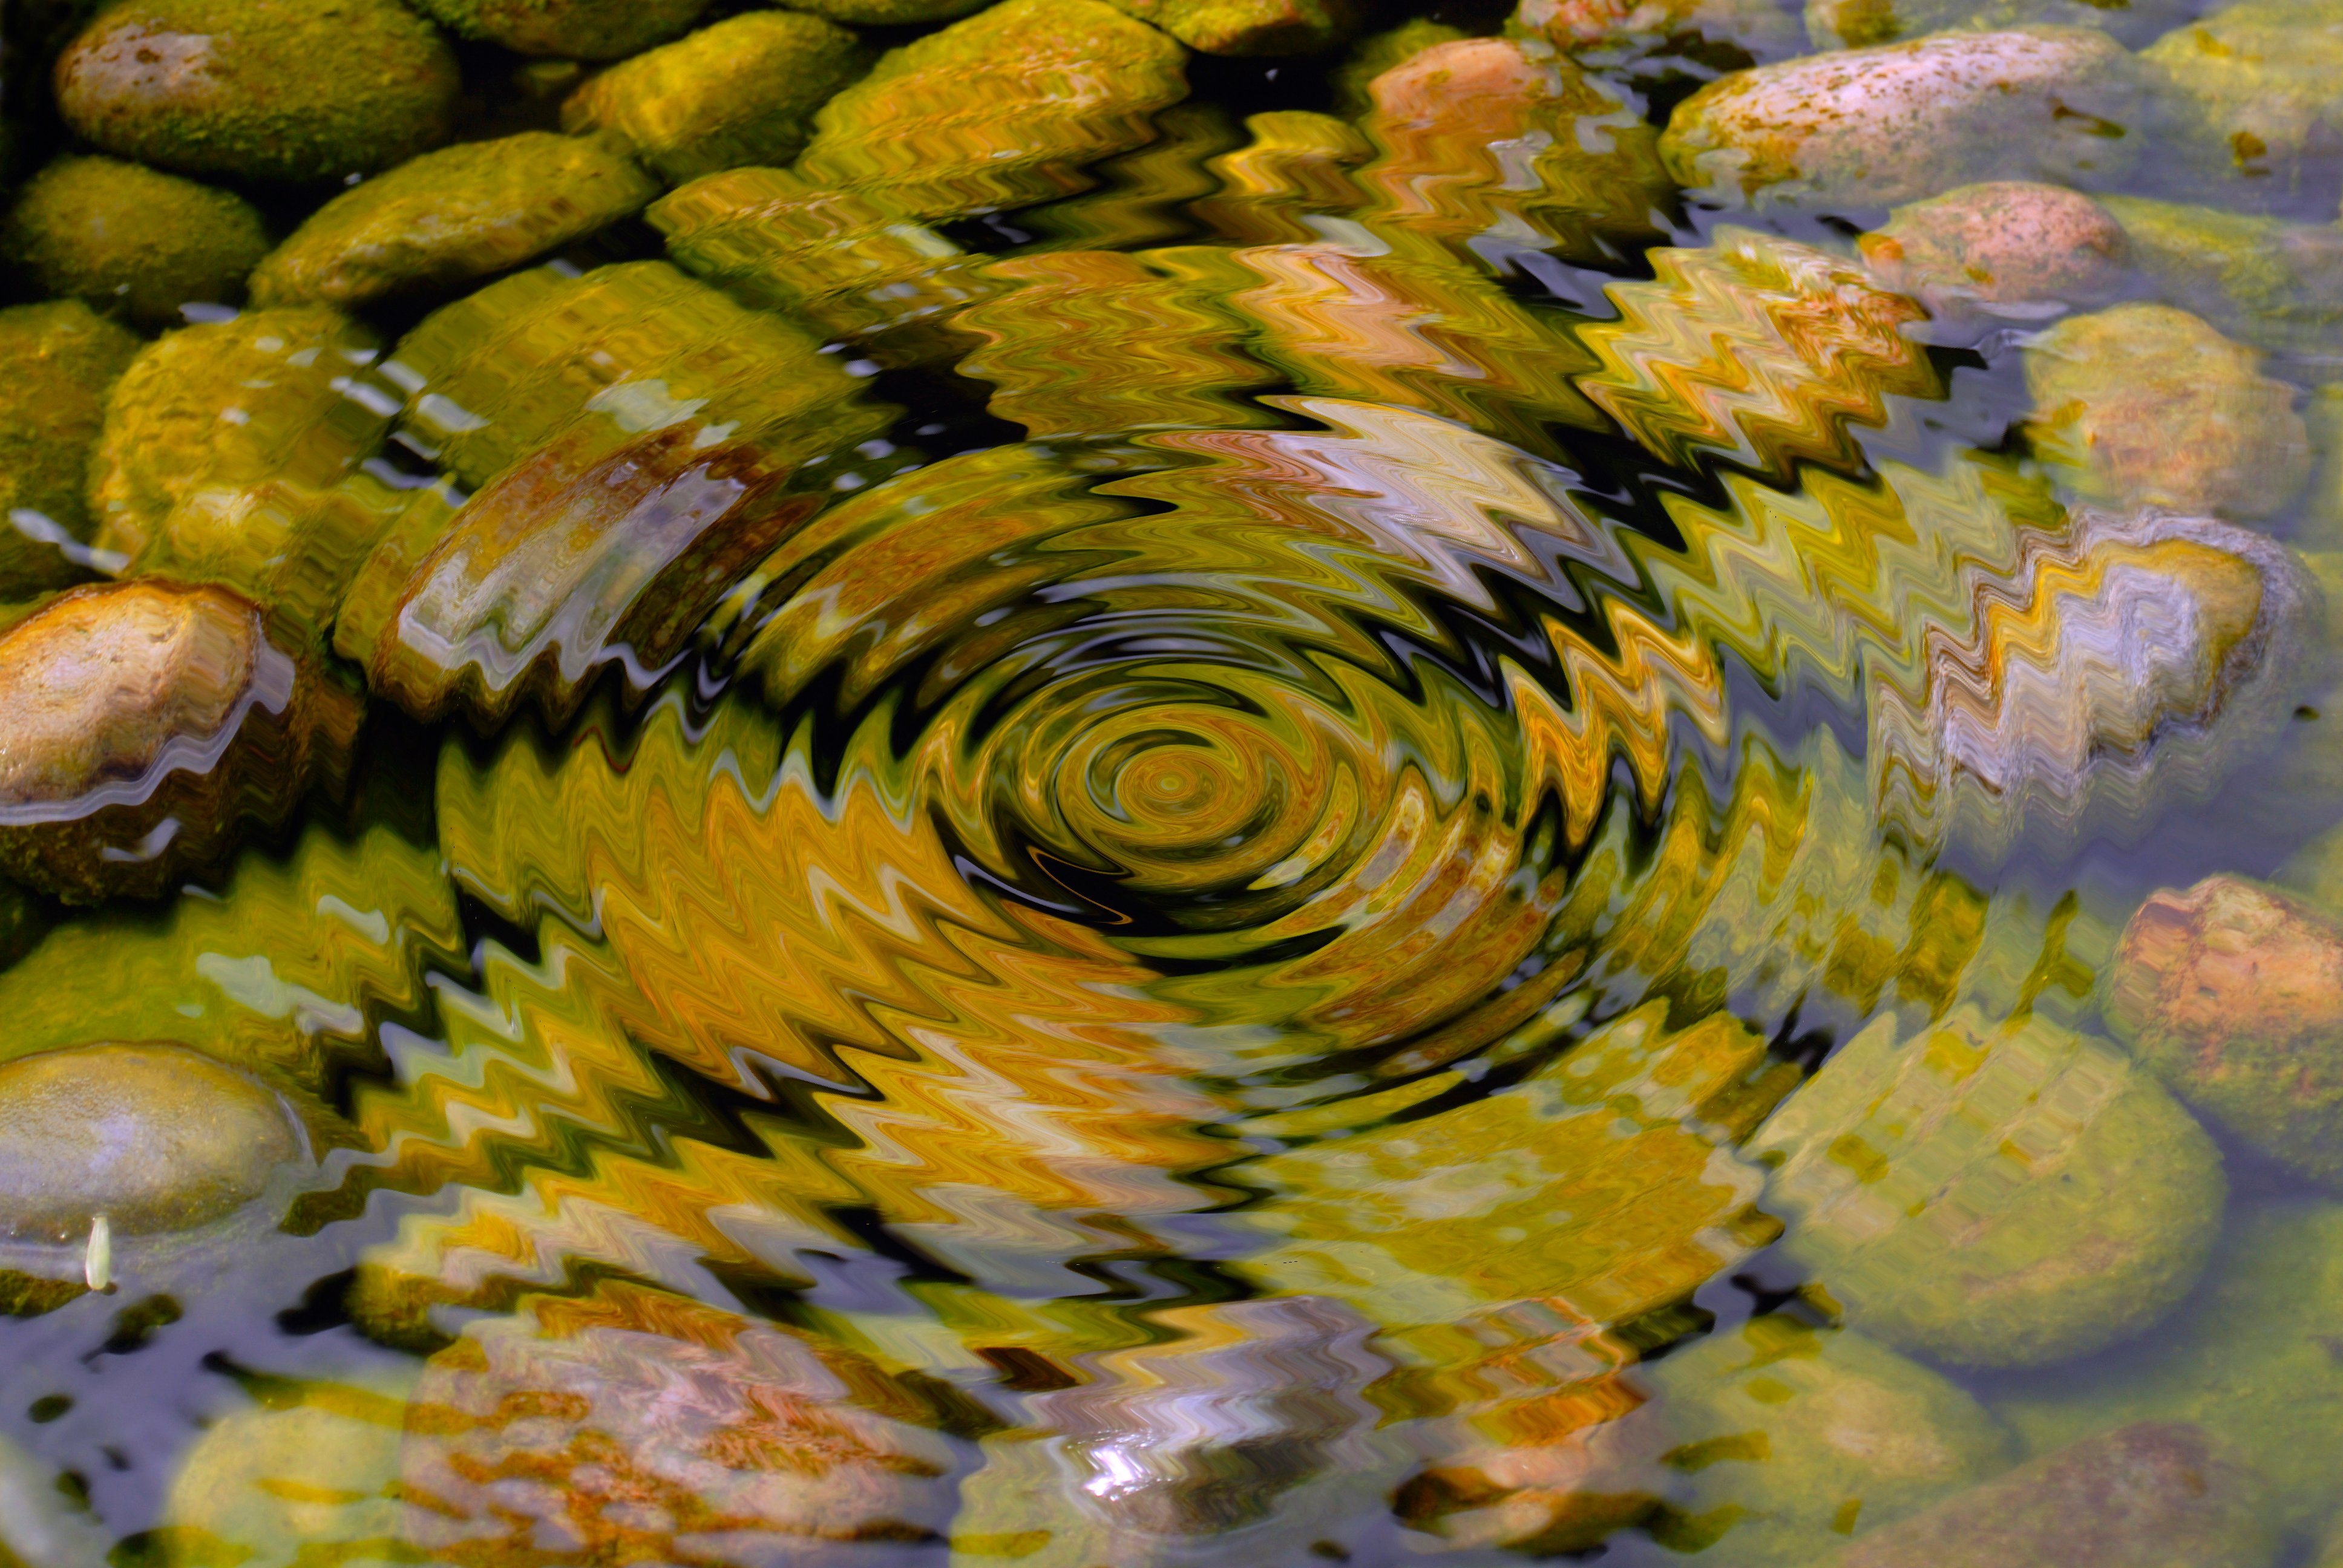 Ripples in the water represent emotional ripples